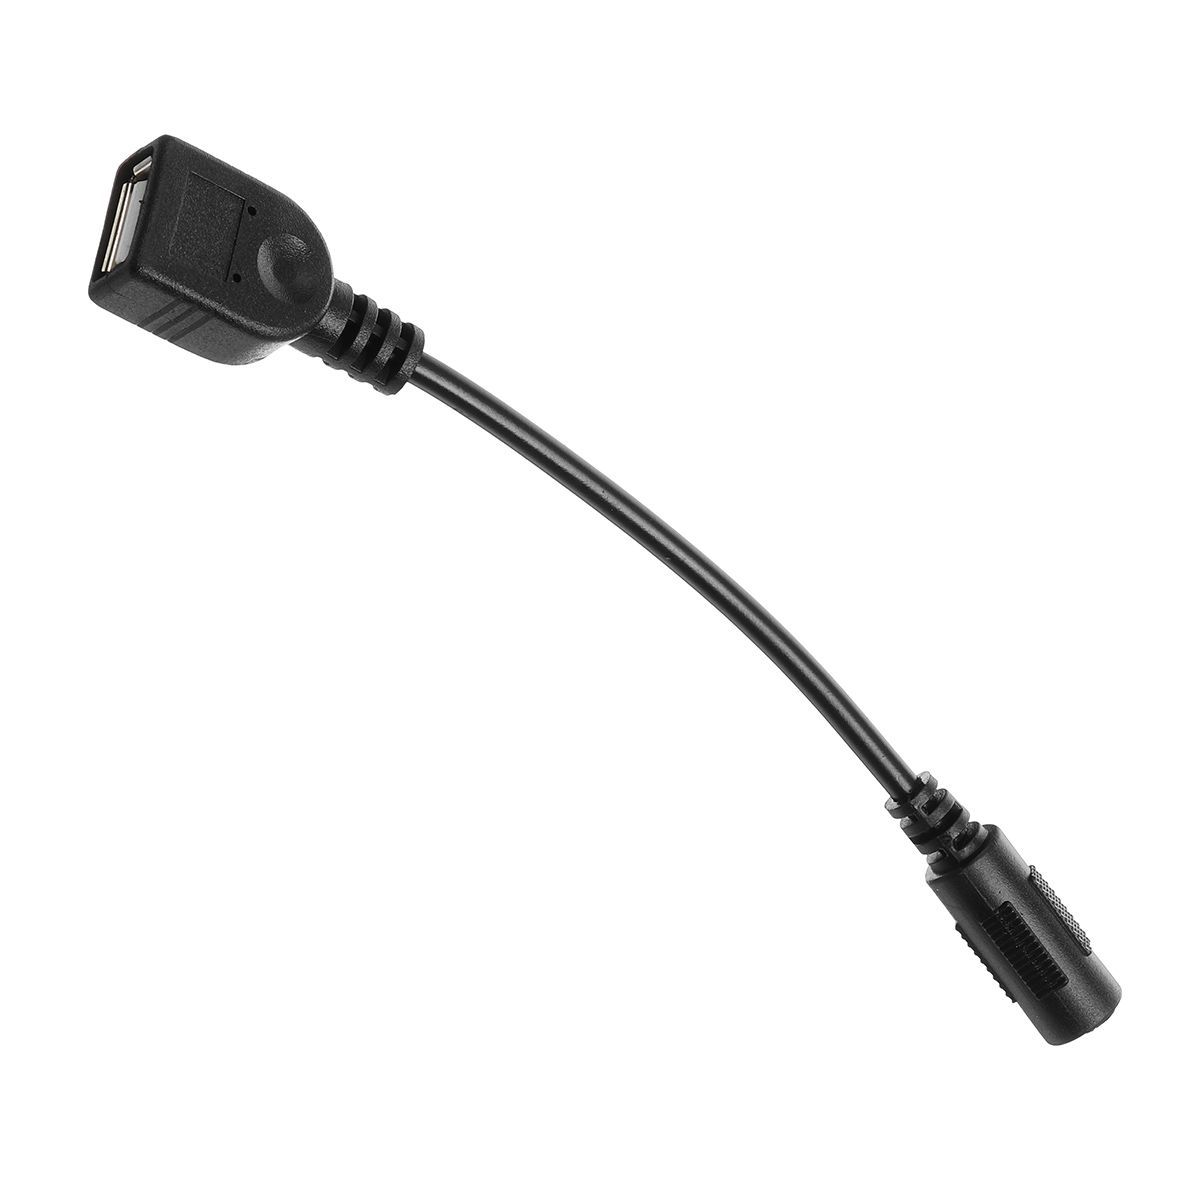 12CM-DC-Power-Plug-5521mm-To-USB--20-A-Female-Supply-Cord-Extension-Cable-1633350